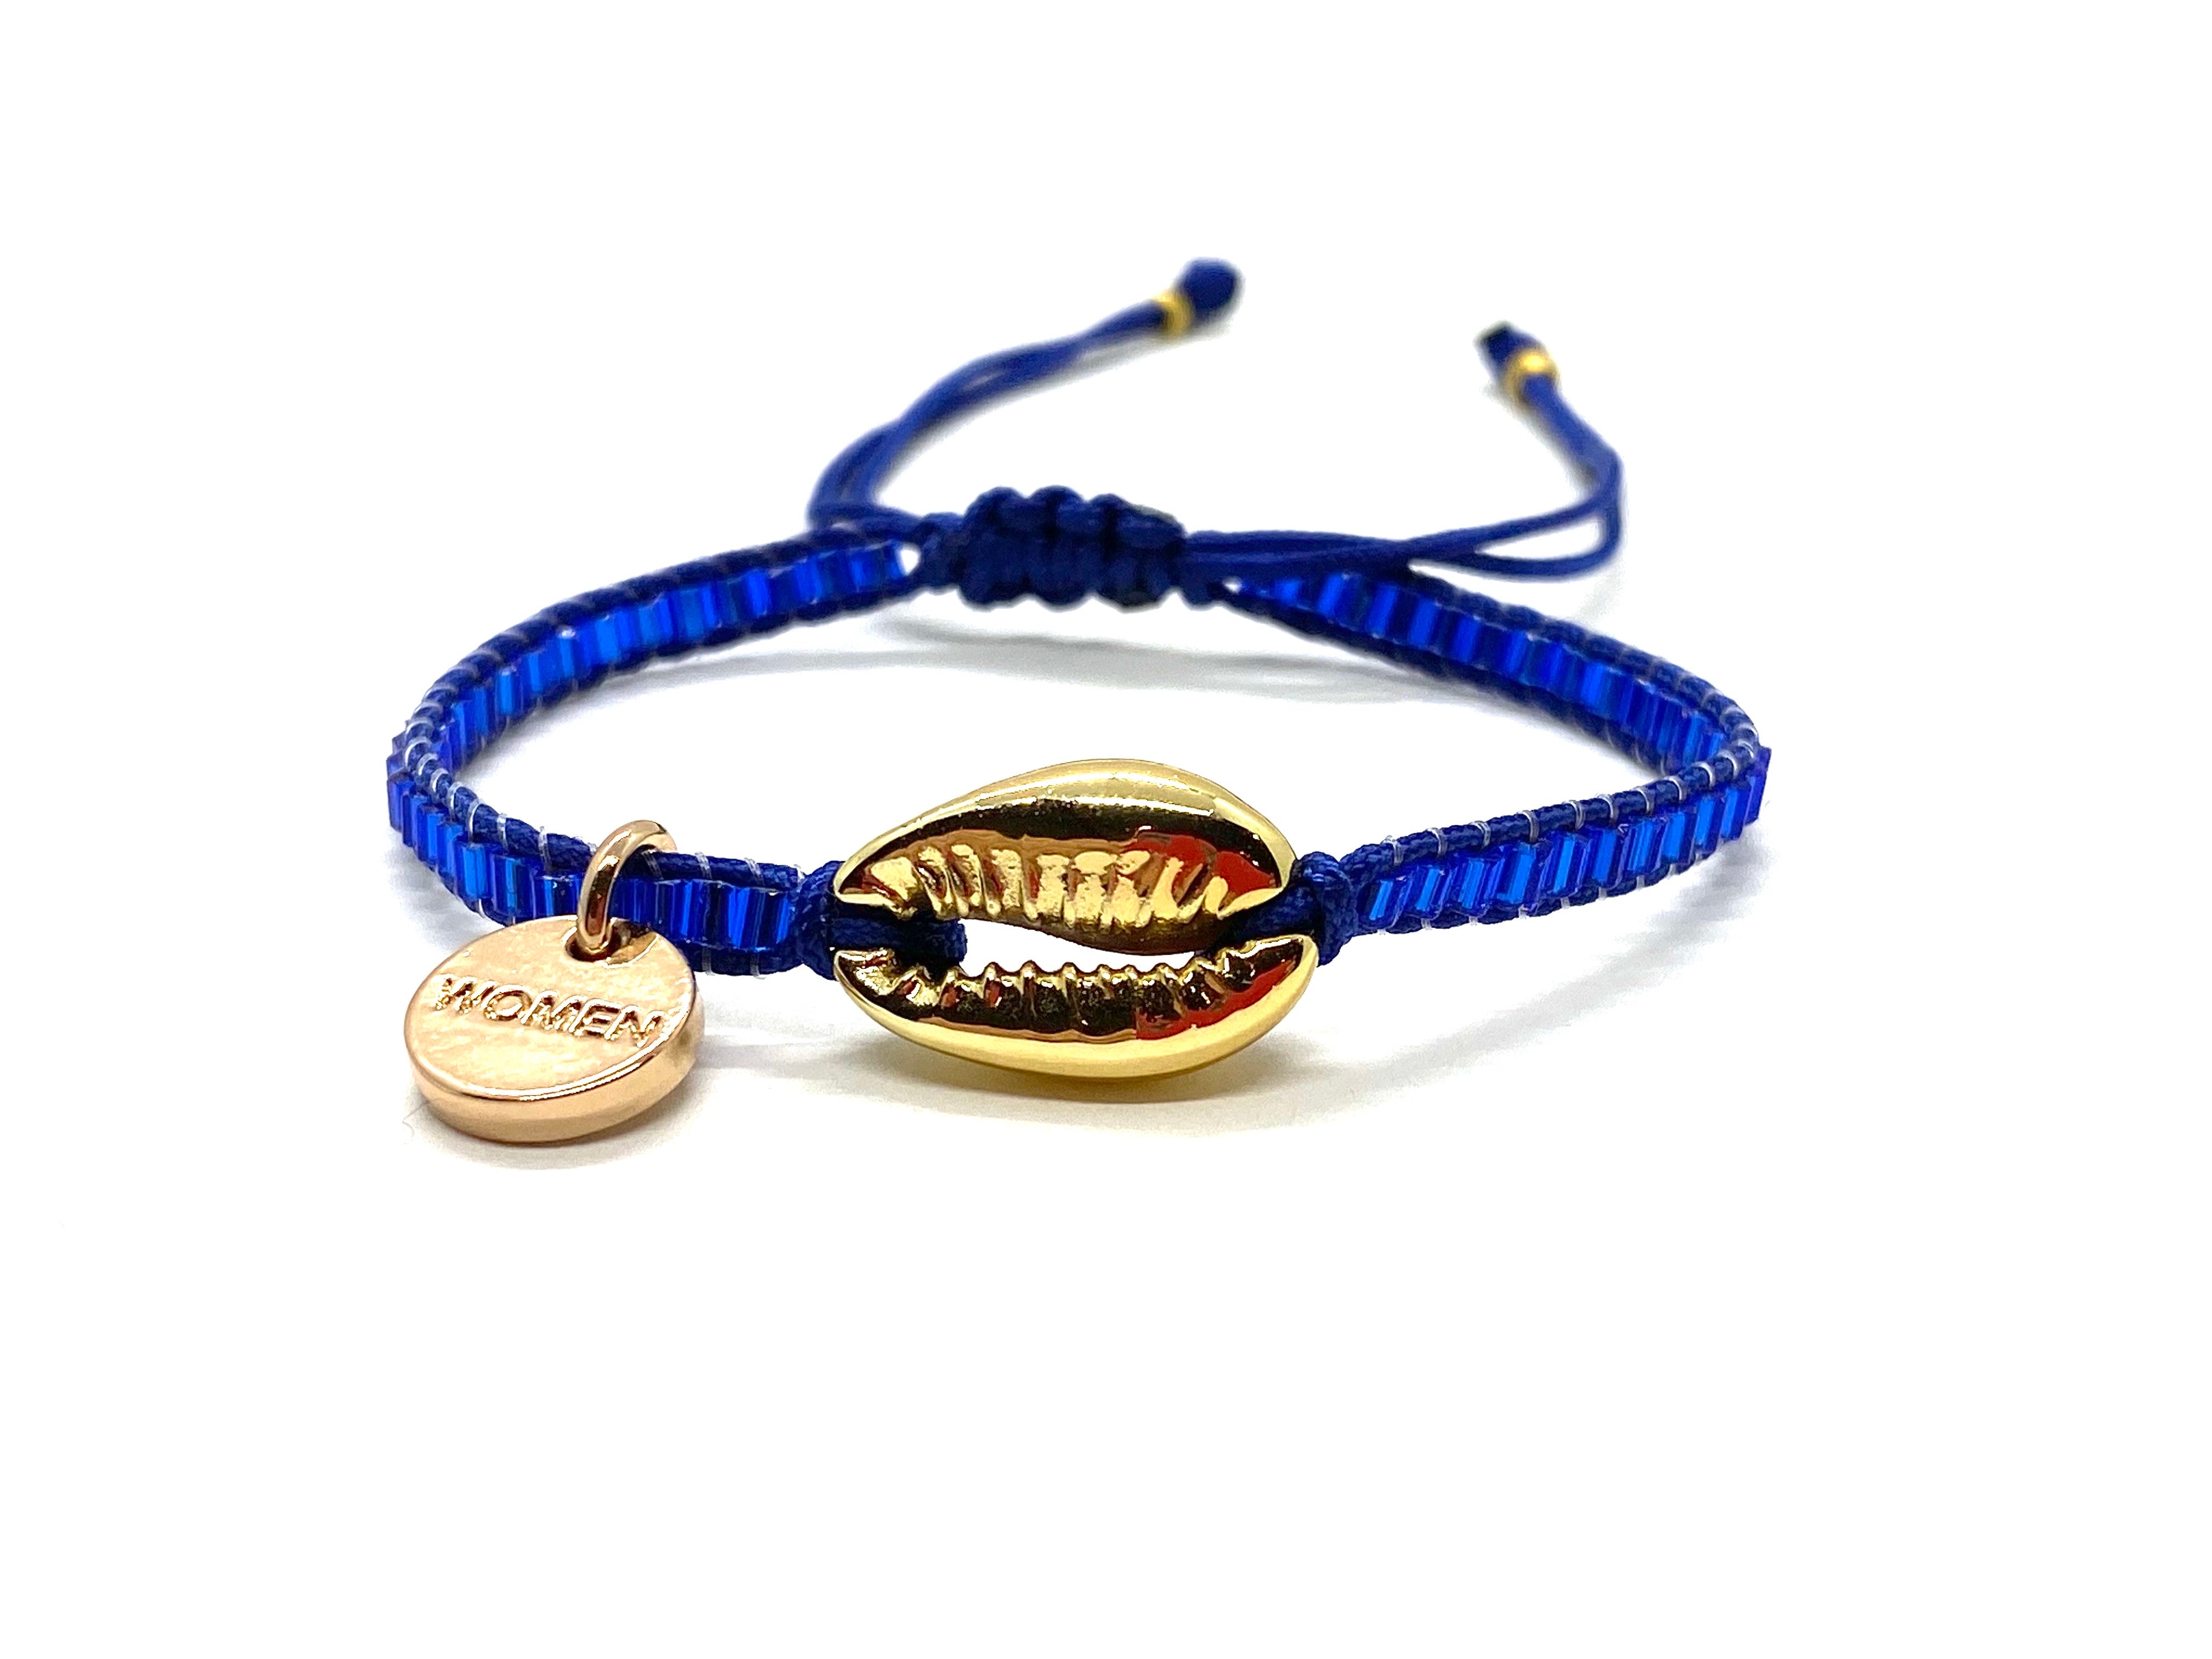 Gold Shell bracelet, with shiny blue seed beads and blue cord.